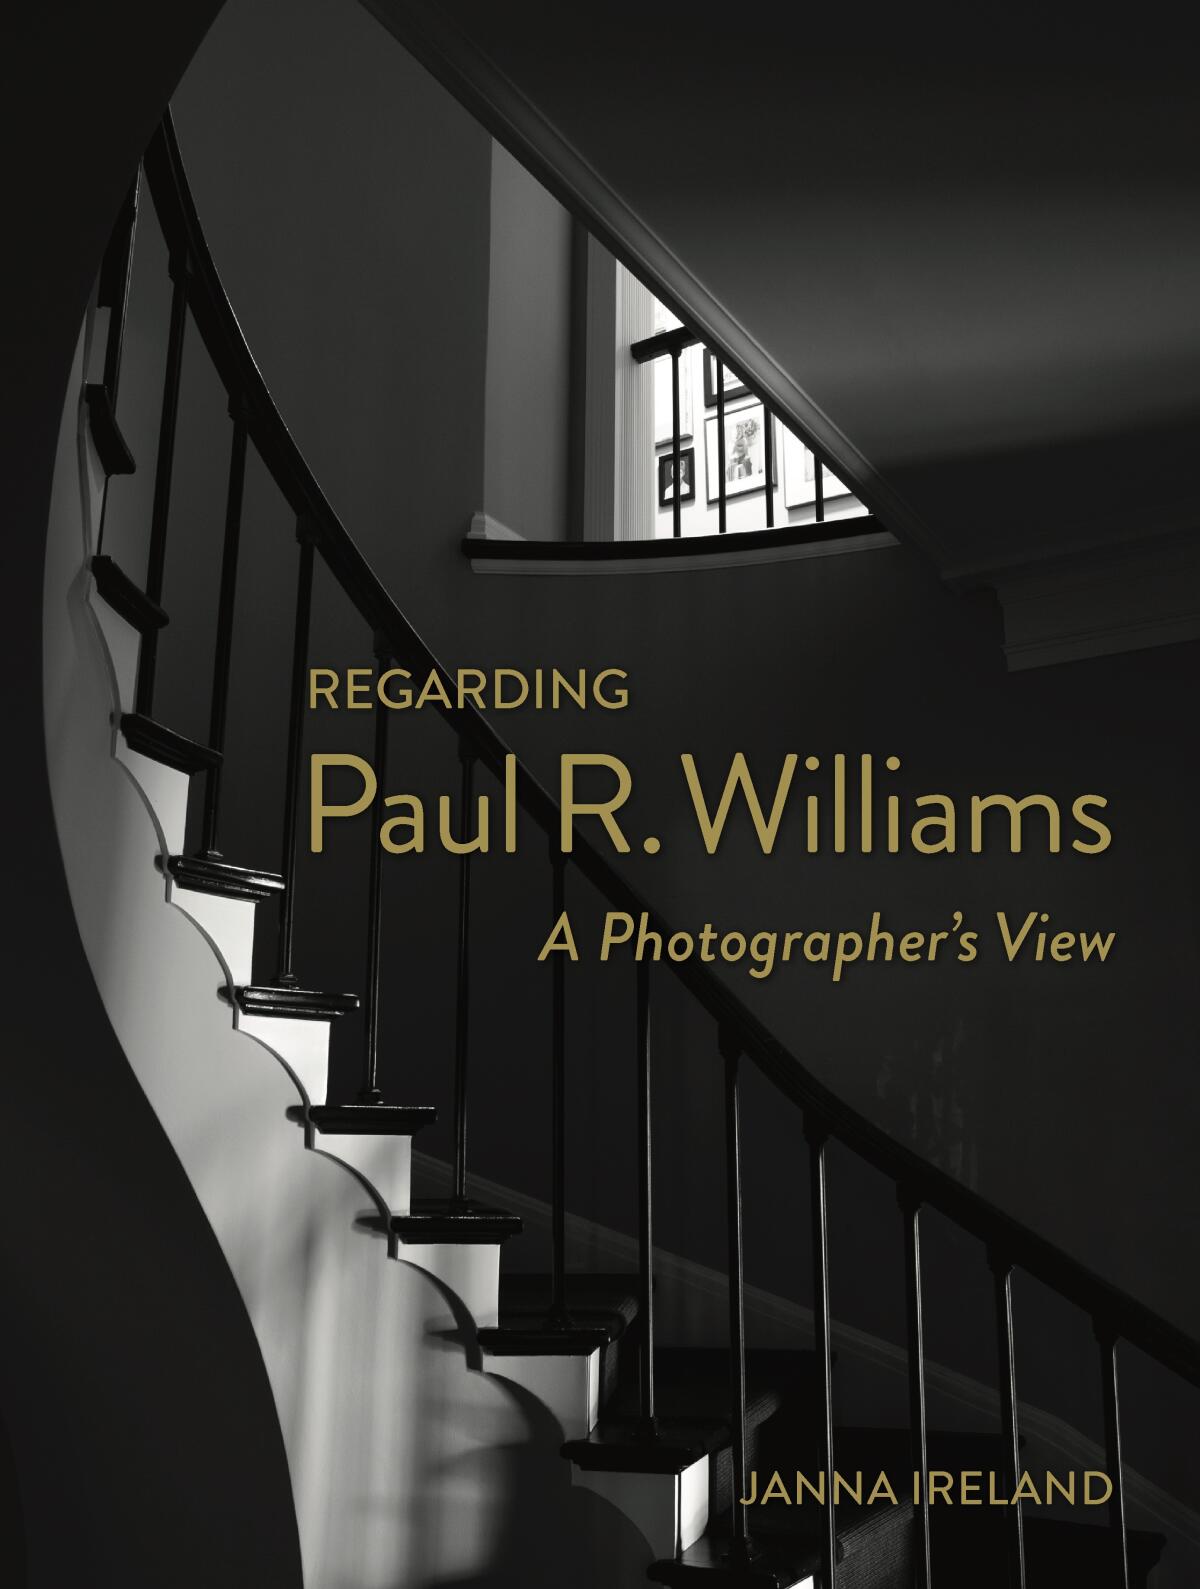 The cover of "Regarding Paul R. Williams: A Photographer's View," by Janna Ireland shows a curving staircase in shadow.